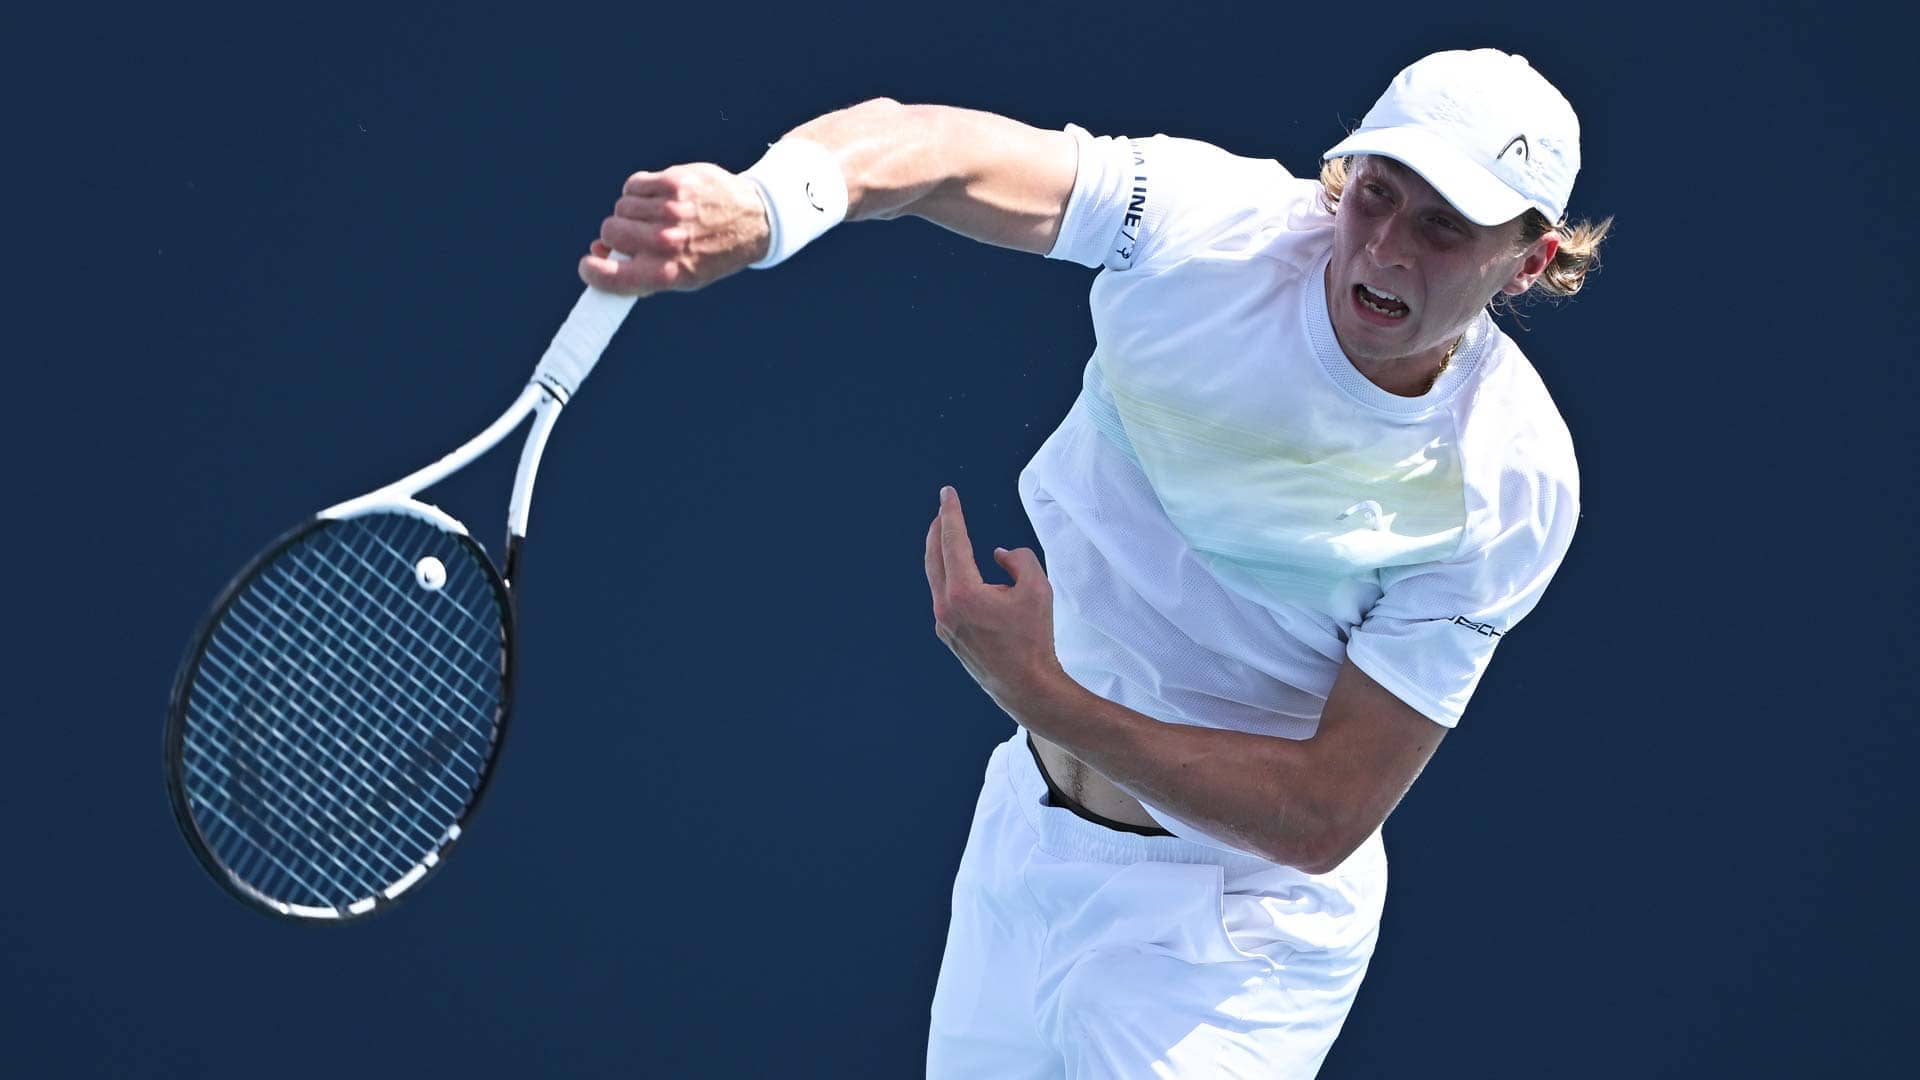 Emil Ruusuvuori has climbed as high as No. 40 in the Pepperstone ATP Rankings.